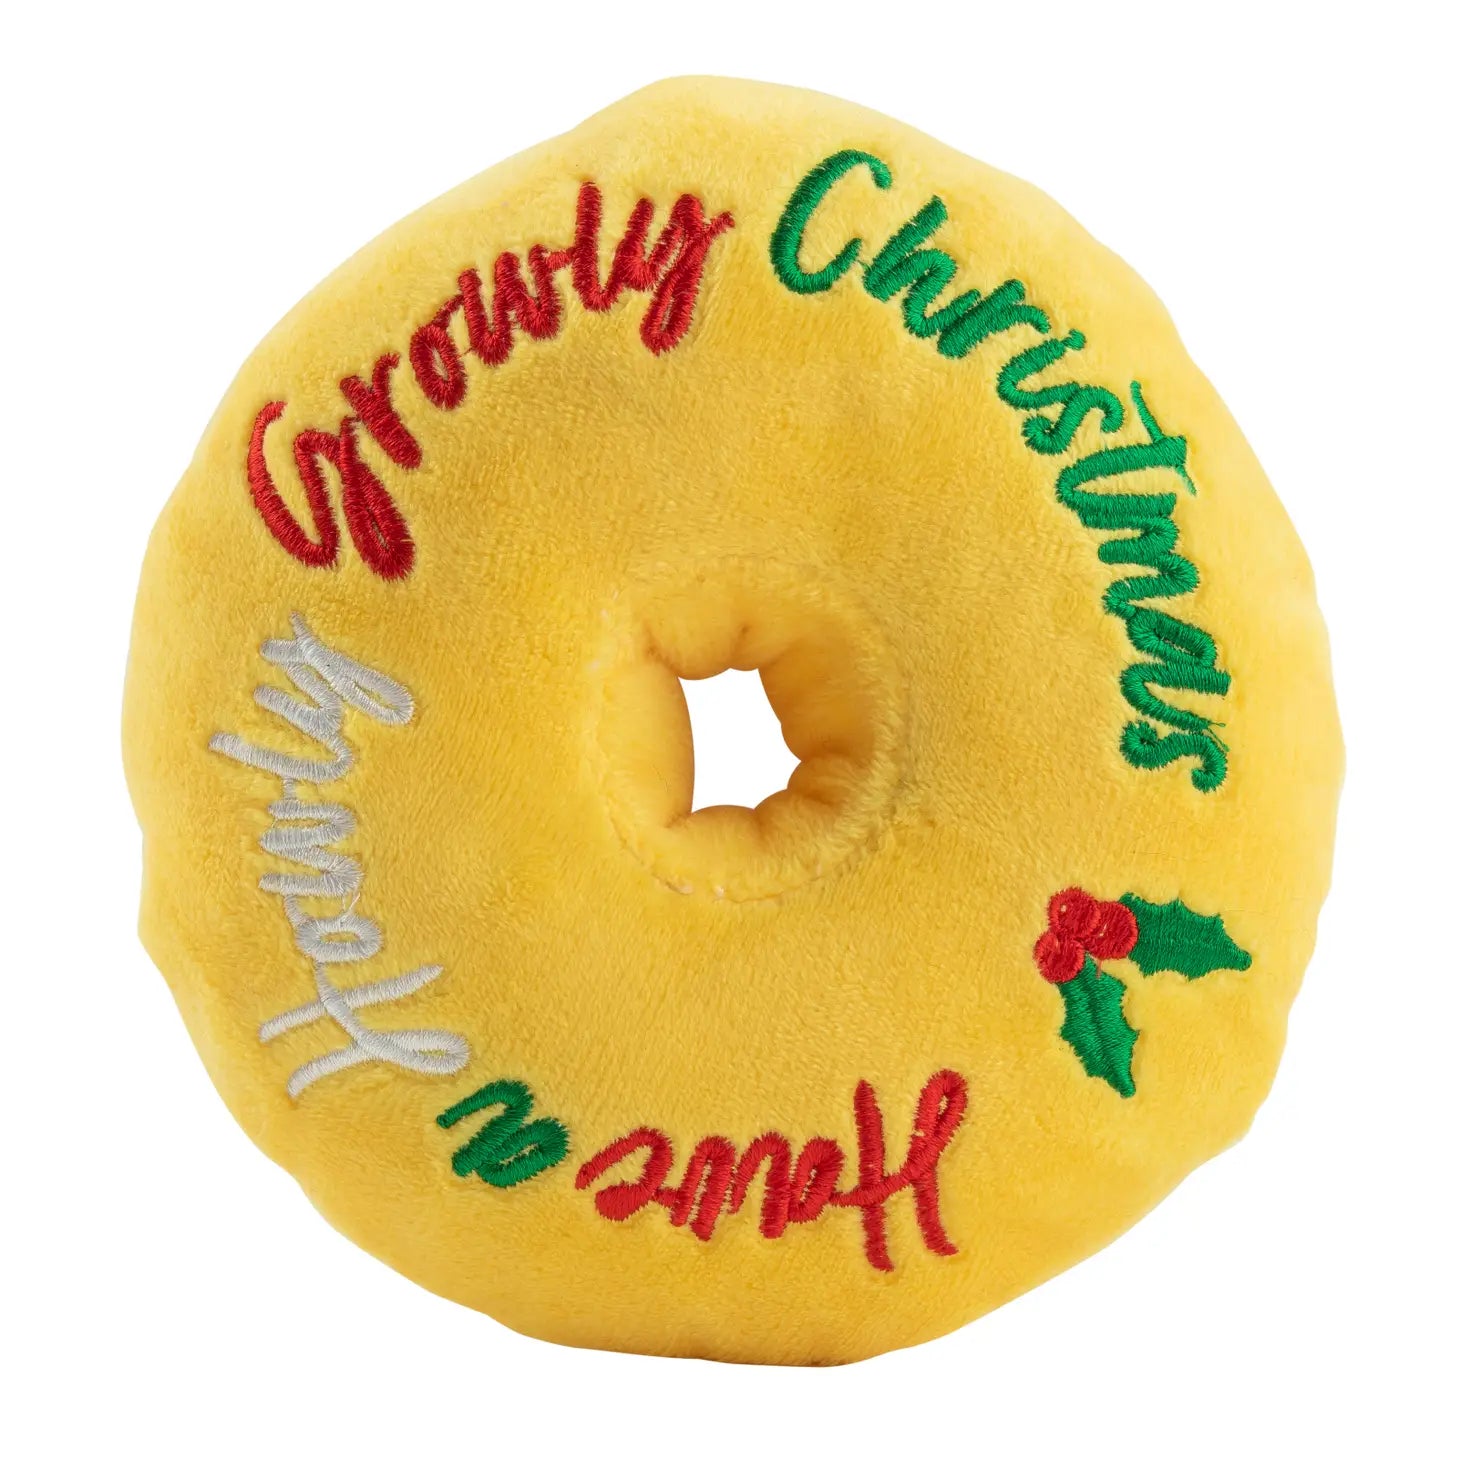 Haute Diggity Dog - Puppermint Donut Dog Toy